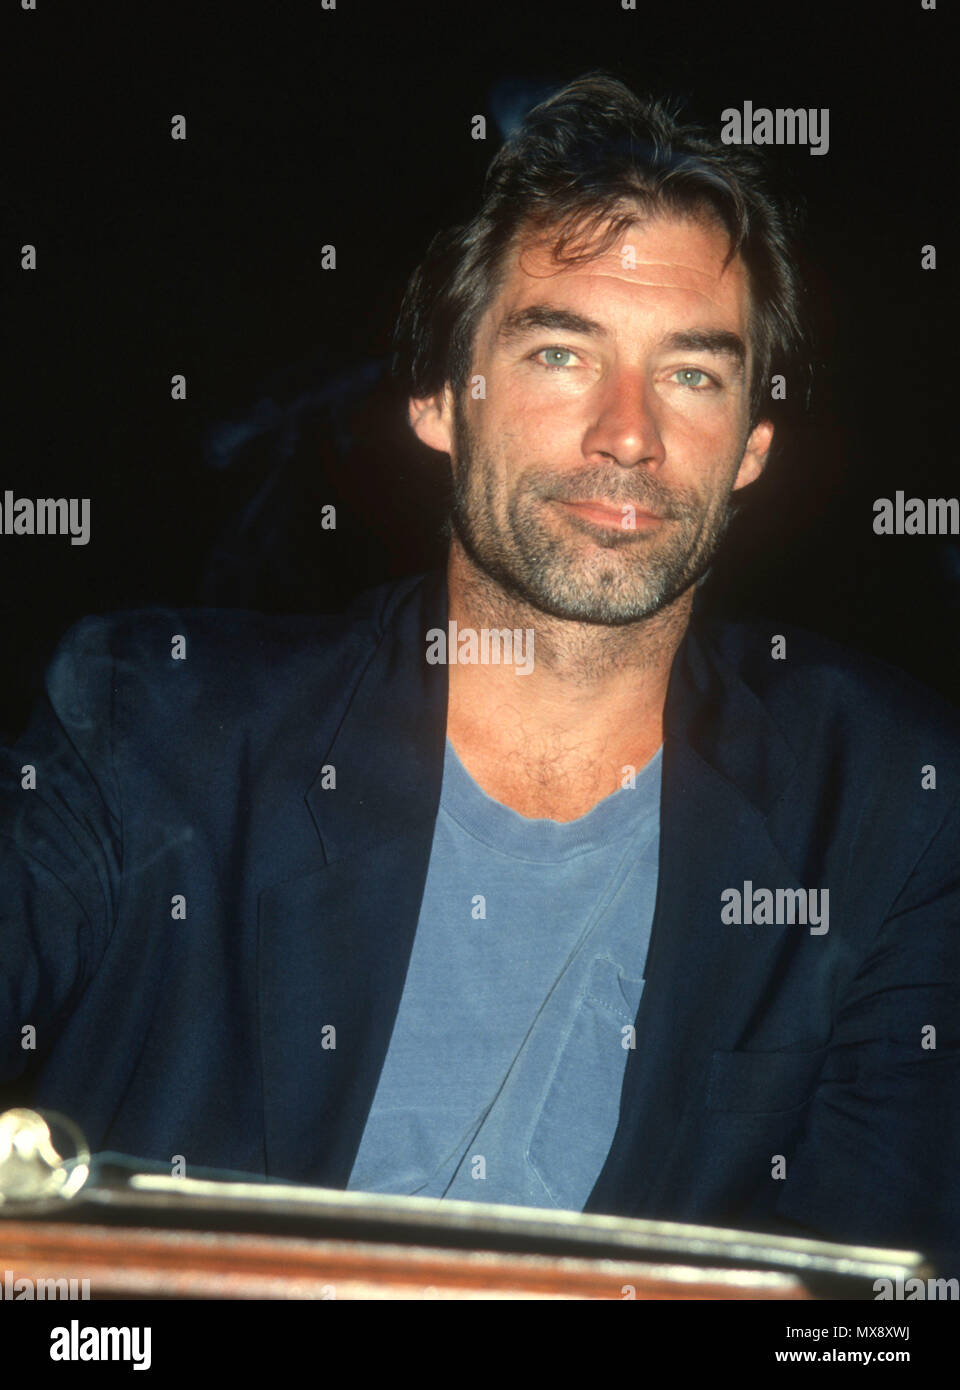 BEVERLY HILLS, CA - AUGUST 04: Actor Timothy Dalton attends the final night performance of 'Love Letters' on August 4, 1991 at the Canon Theatre in Beverly Hills, California. Photo by Barry King/Alamy Stock Photo Stock Photo